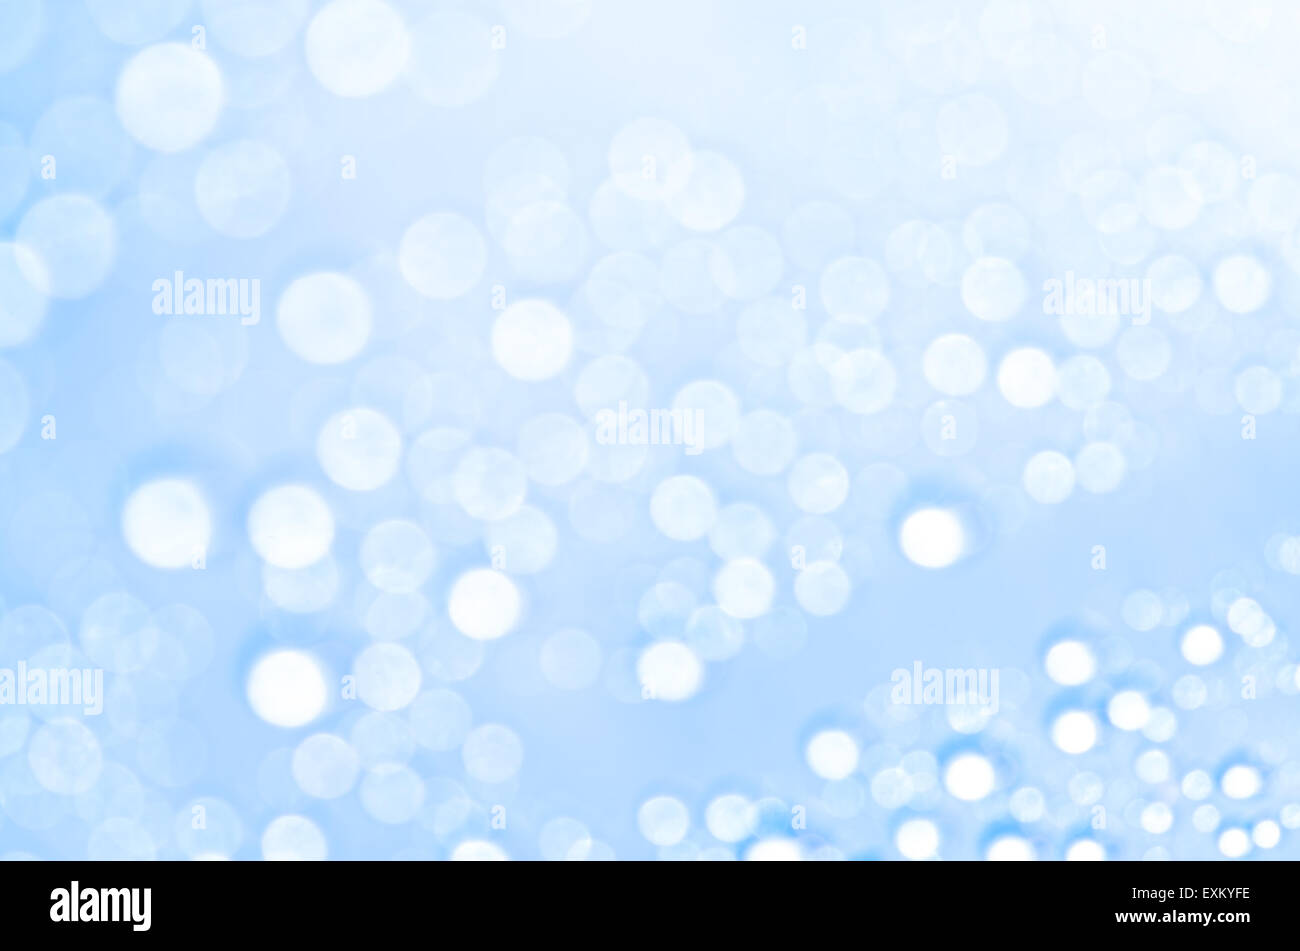 blue abstract blurred bokeh lights background Stock Photo - Alamy